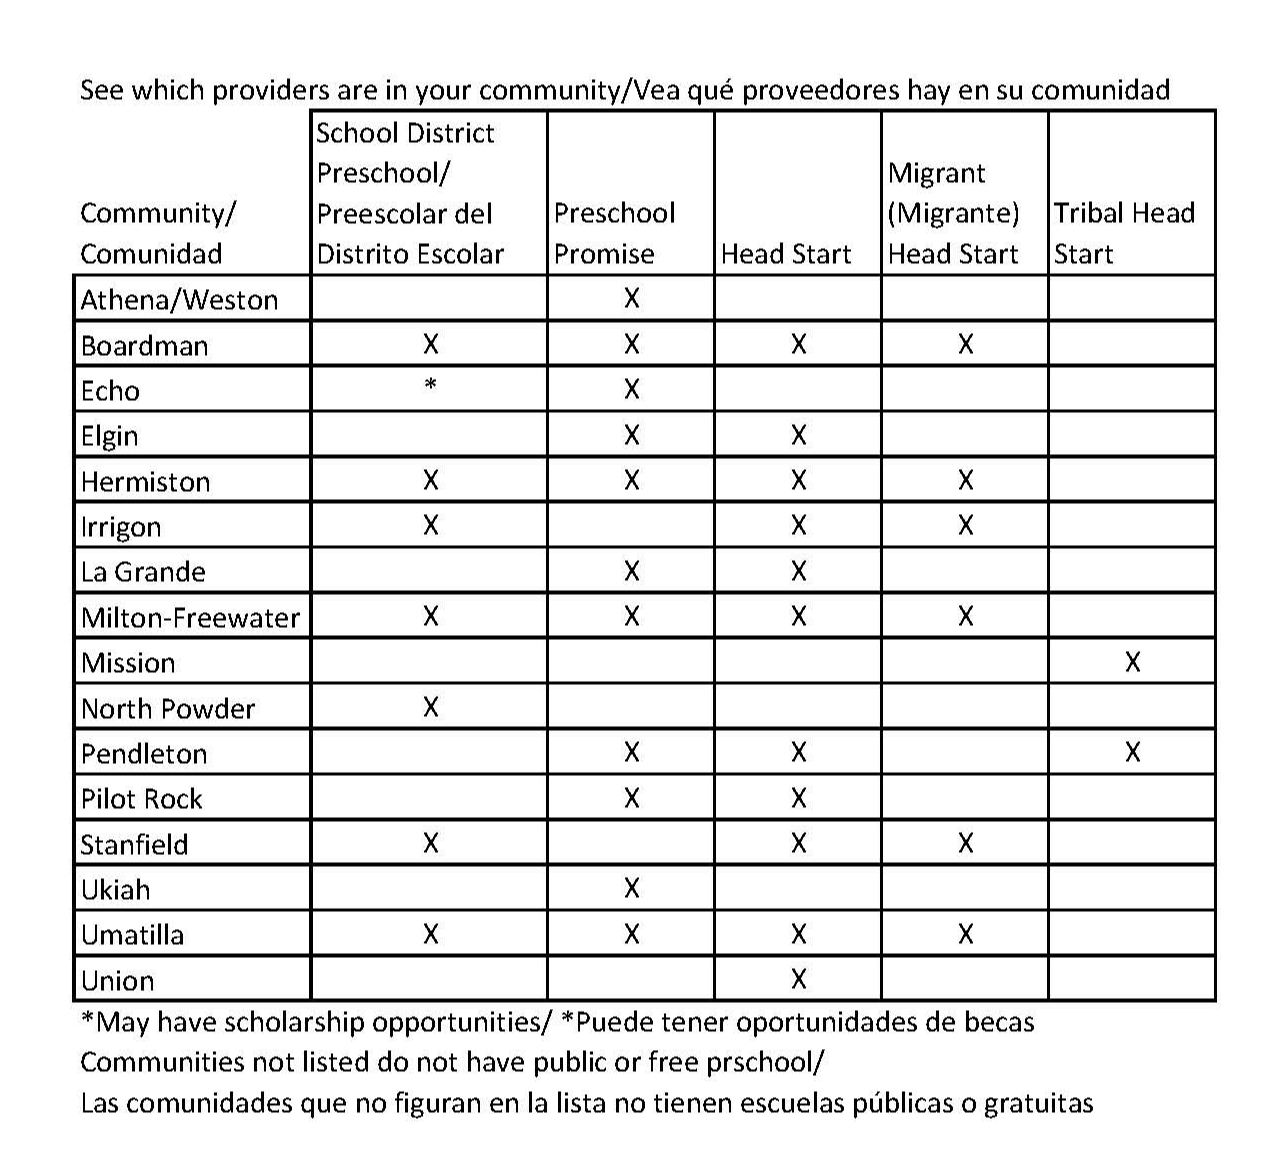 Table of providers in the community